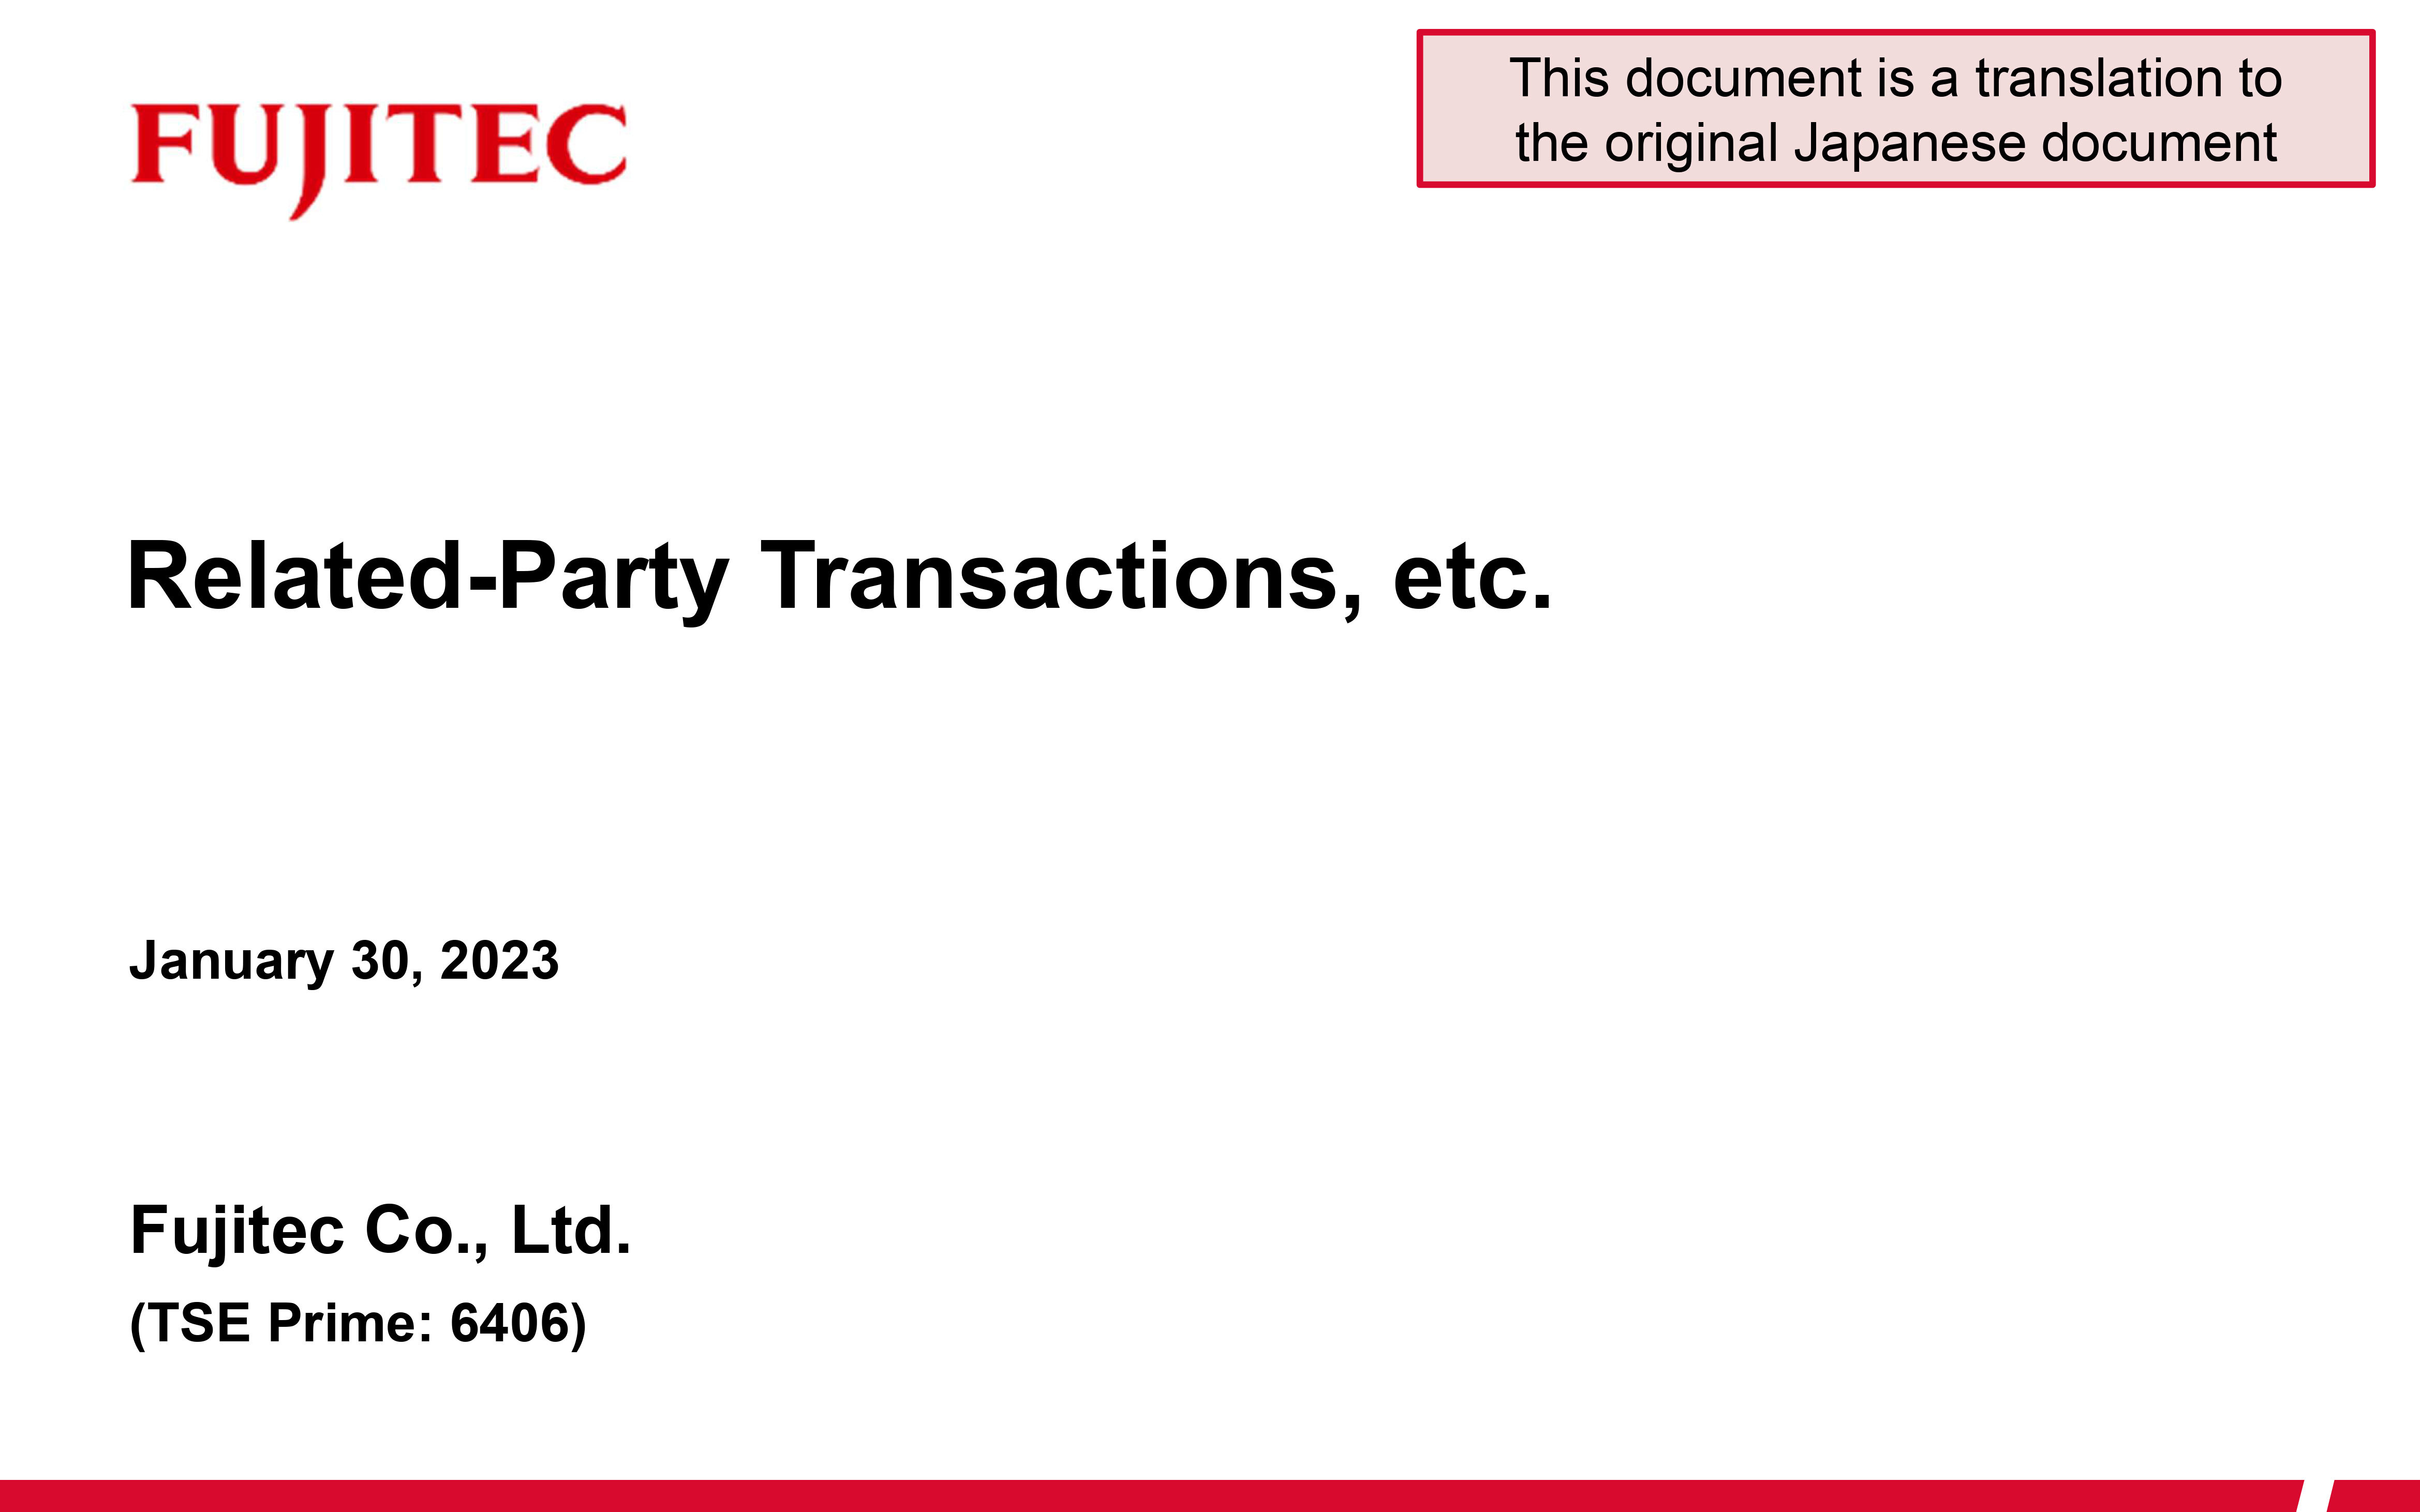 Related-Party Transactions, etc.